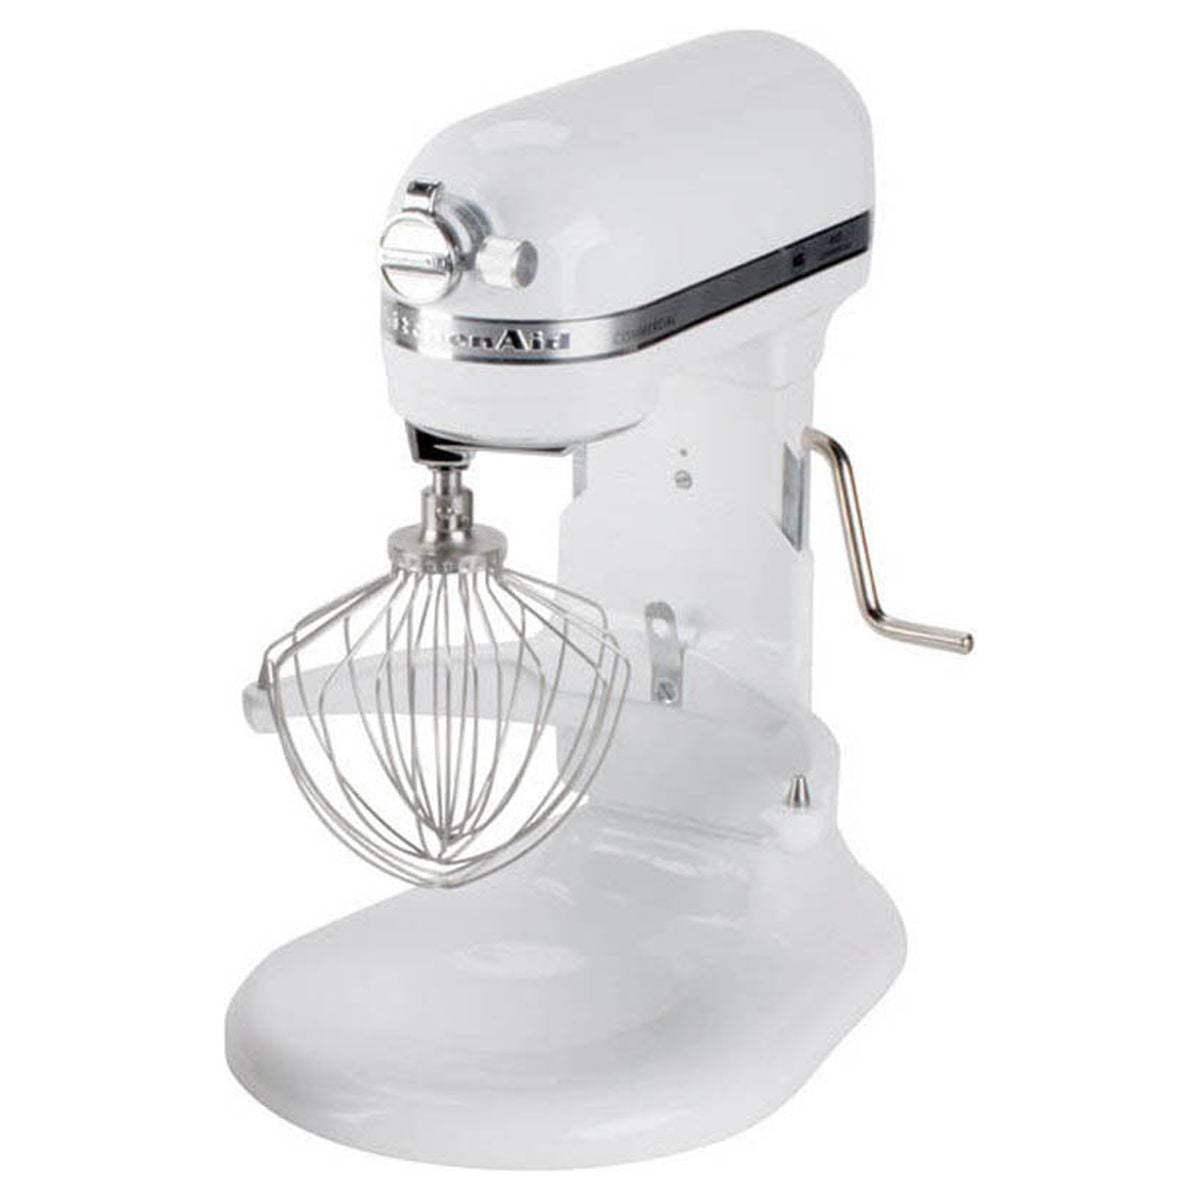 KitchenAid 11-Wire Whip: The Mixer Attachment You Didn't Know You